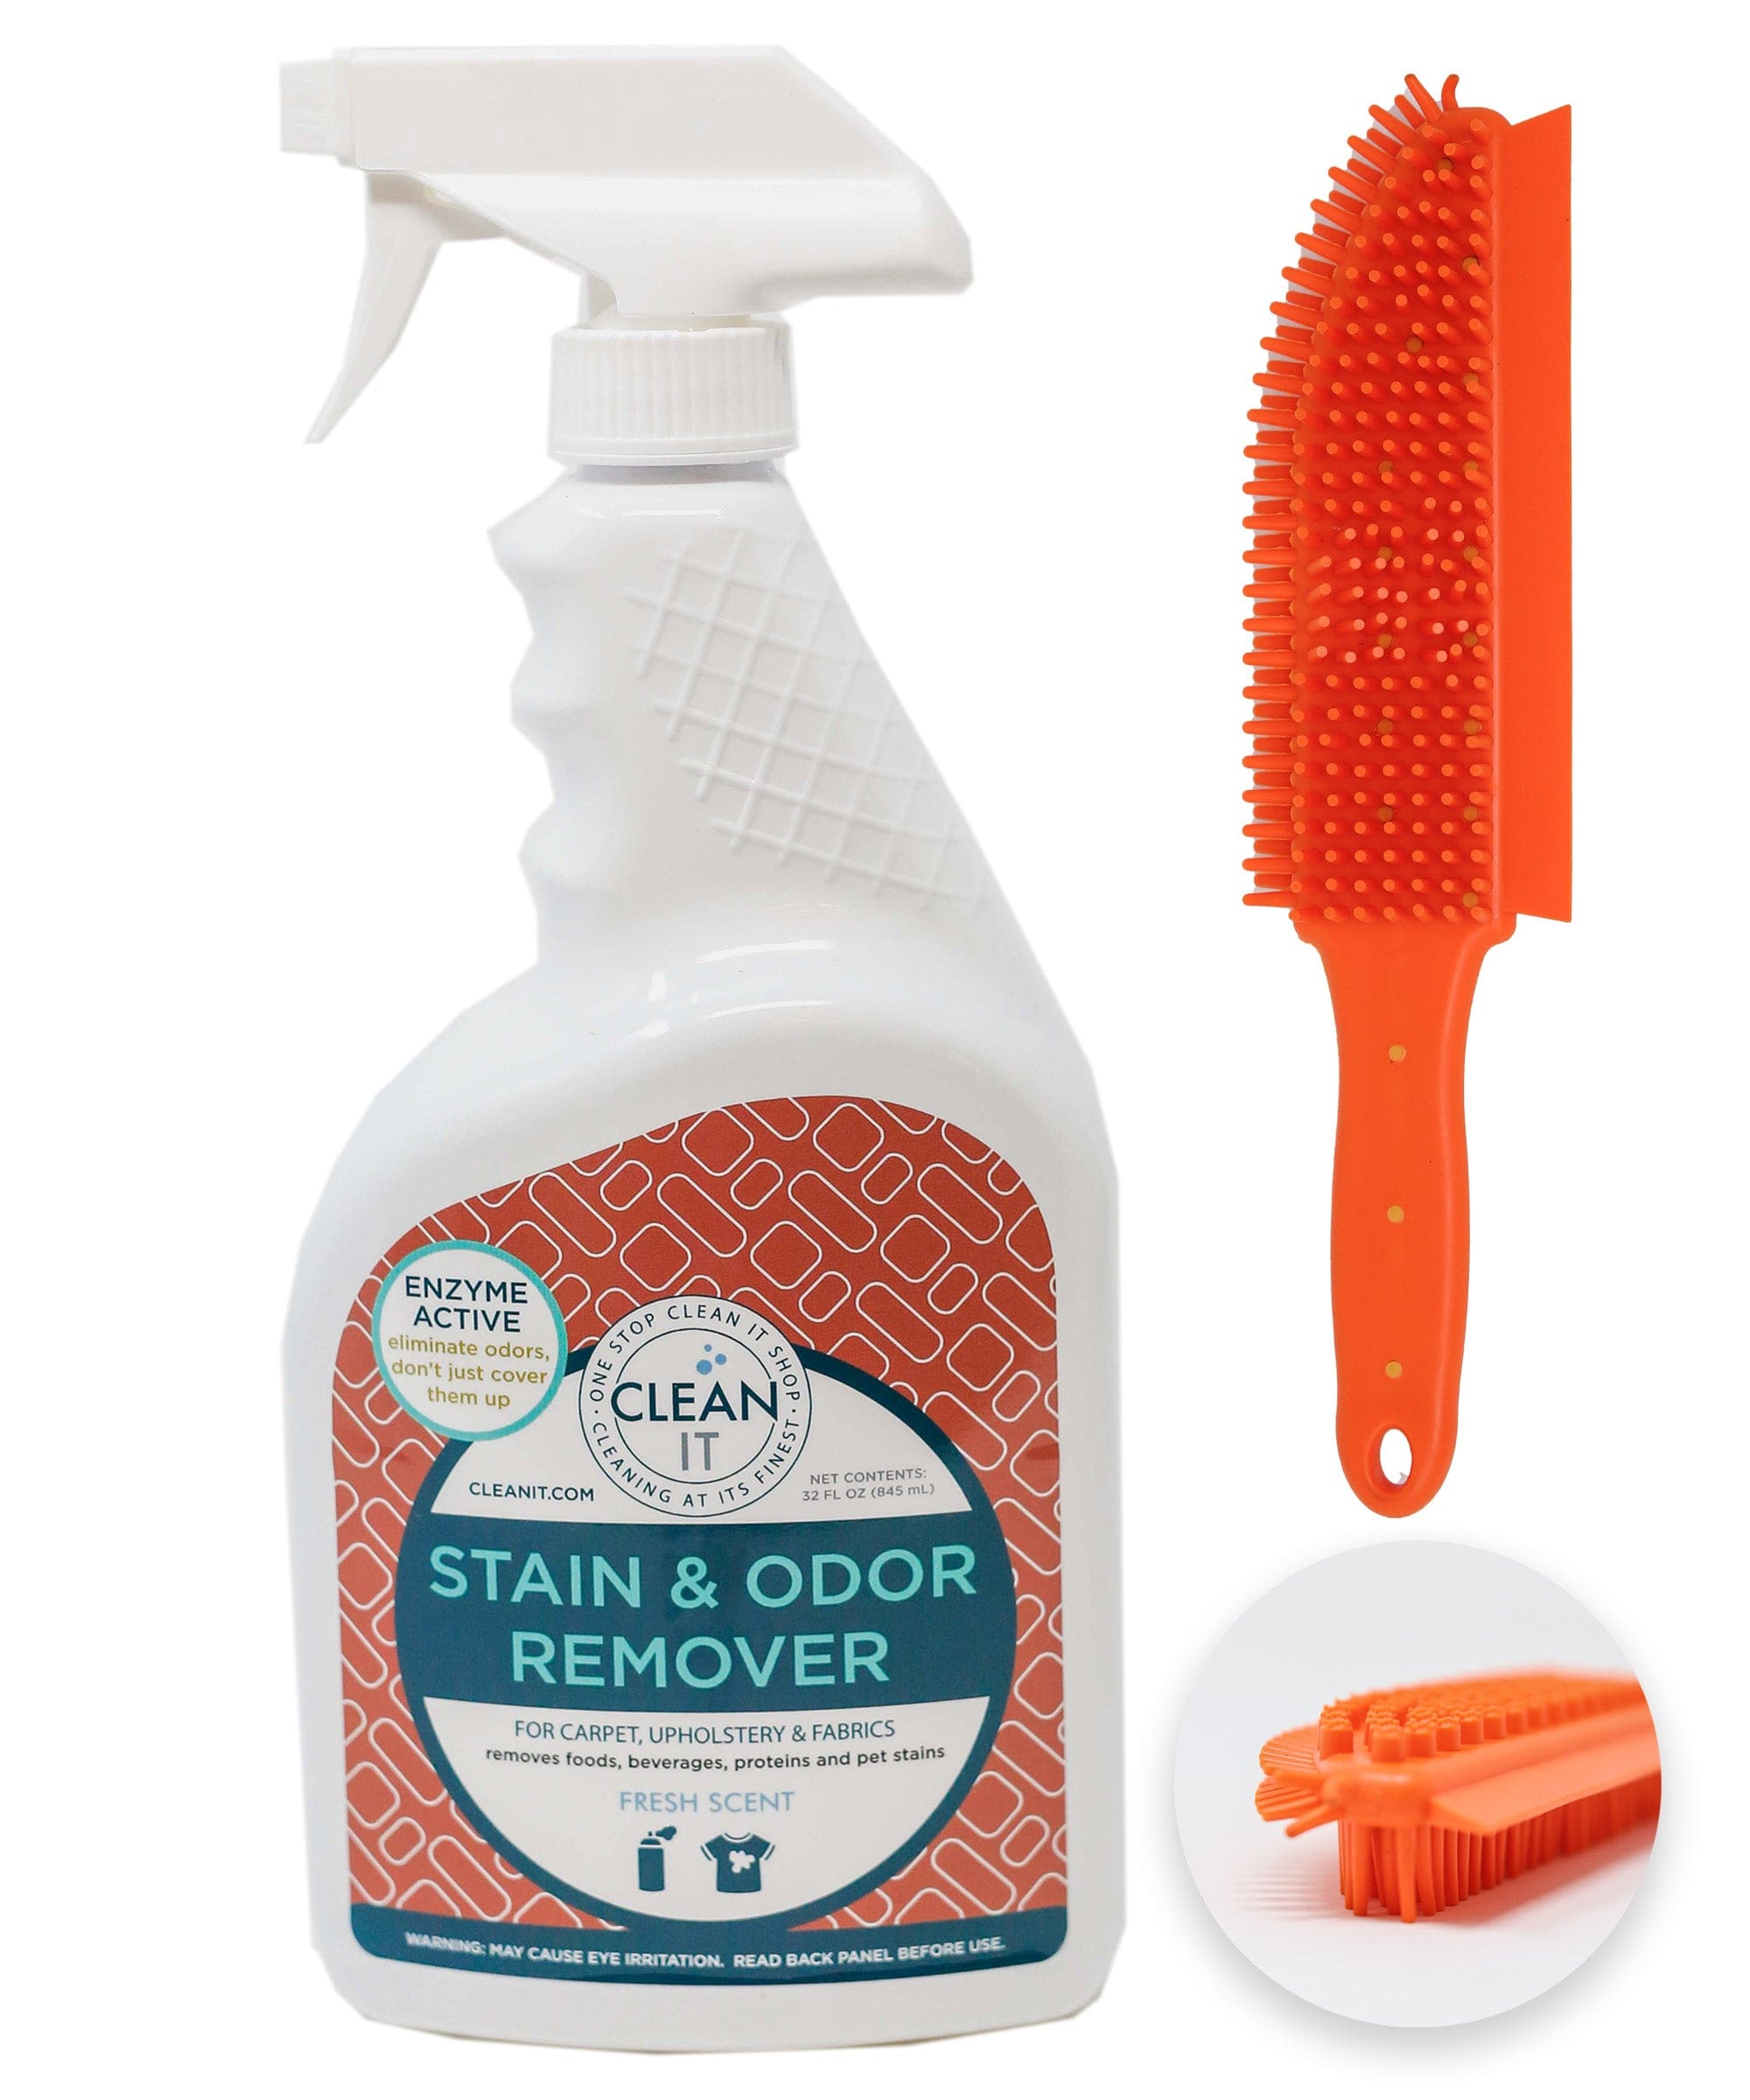 Clean It Stain & Odor Remover Kit – Don Aslett